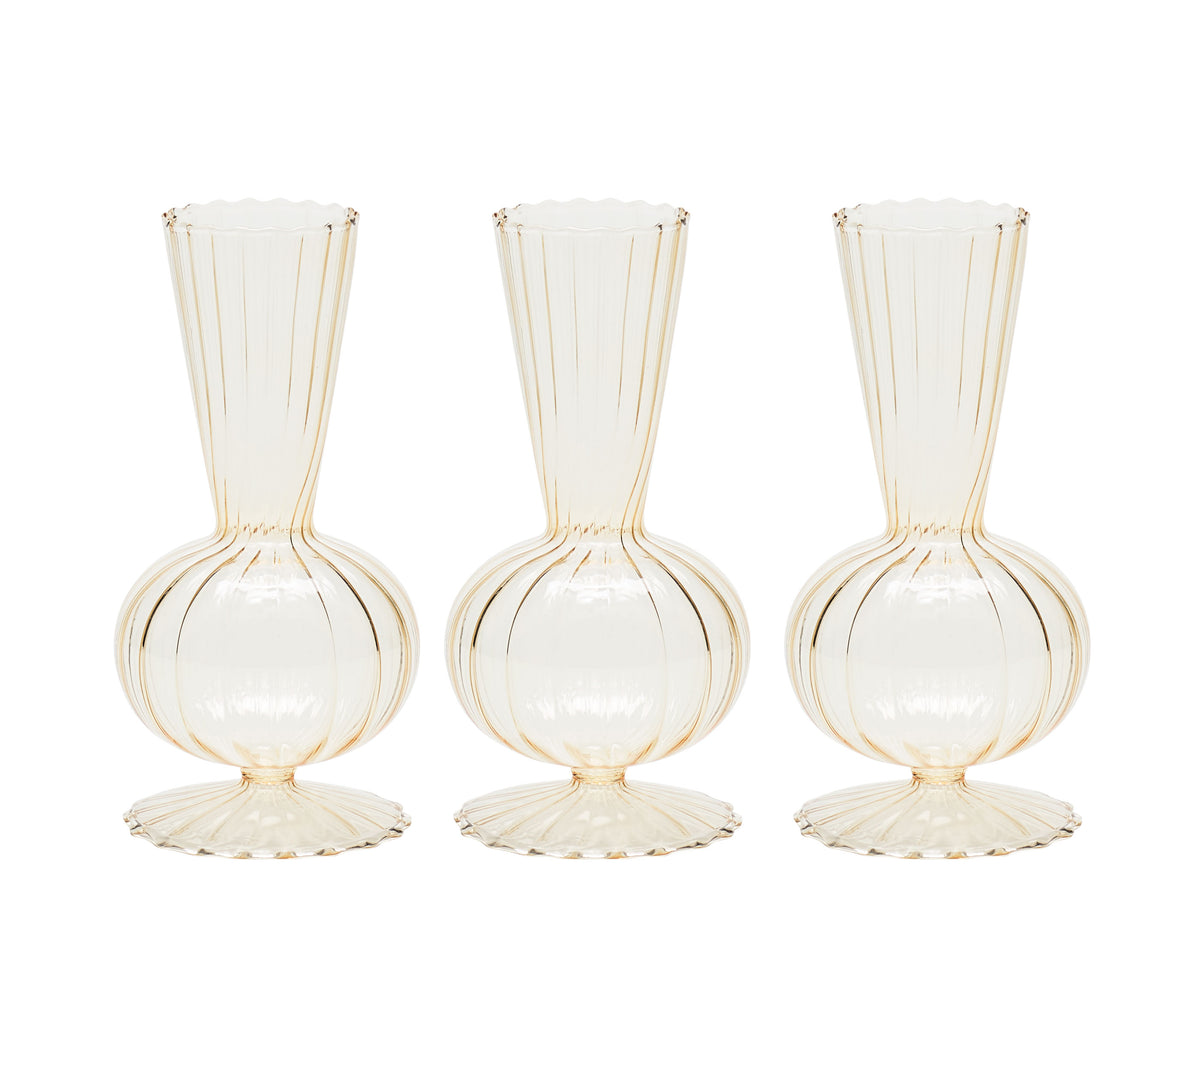 Tess Bud Vase in Champagne, Set of 3 in a Box